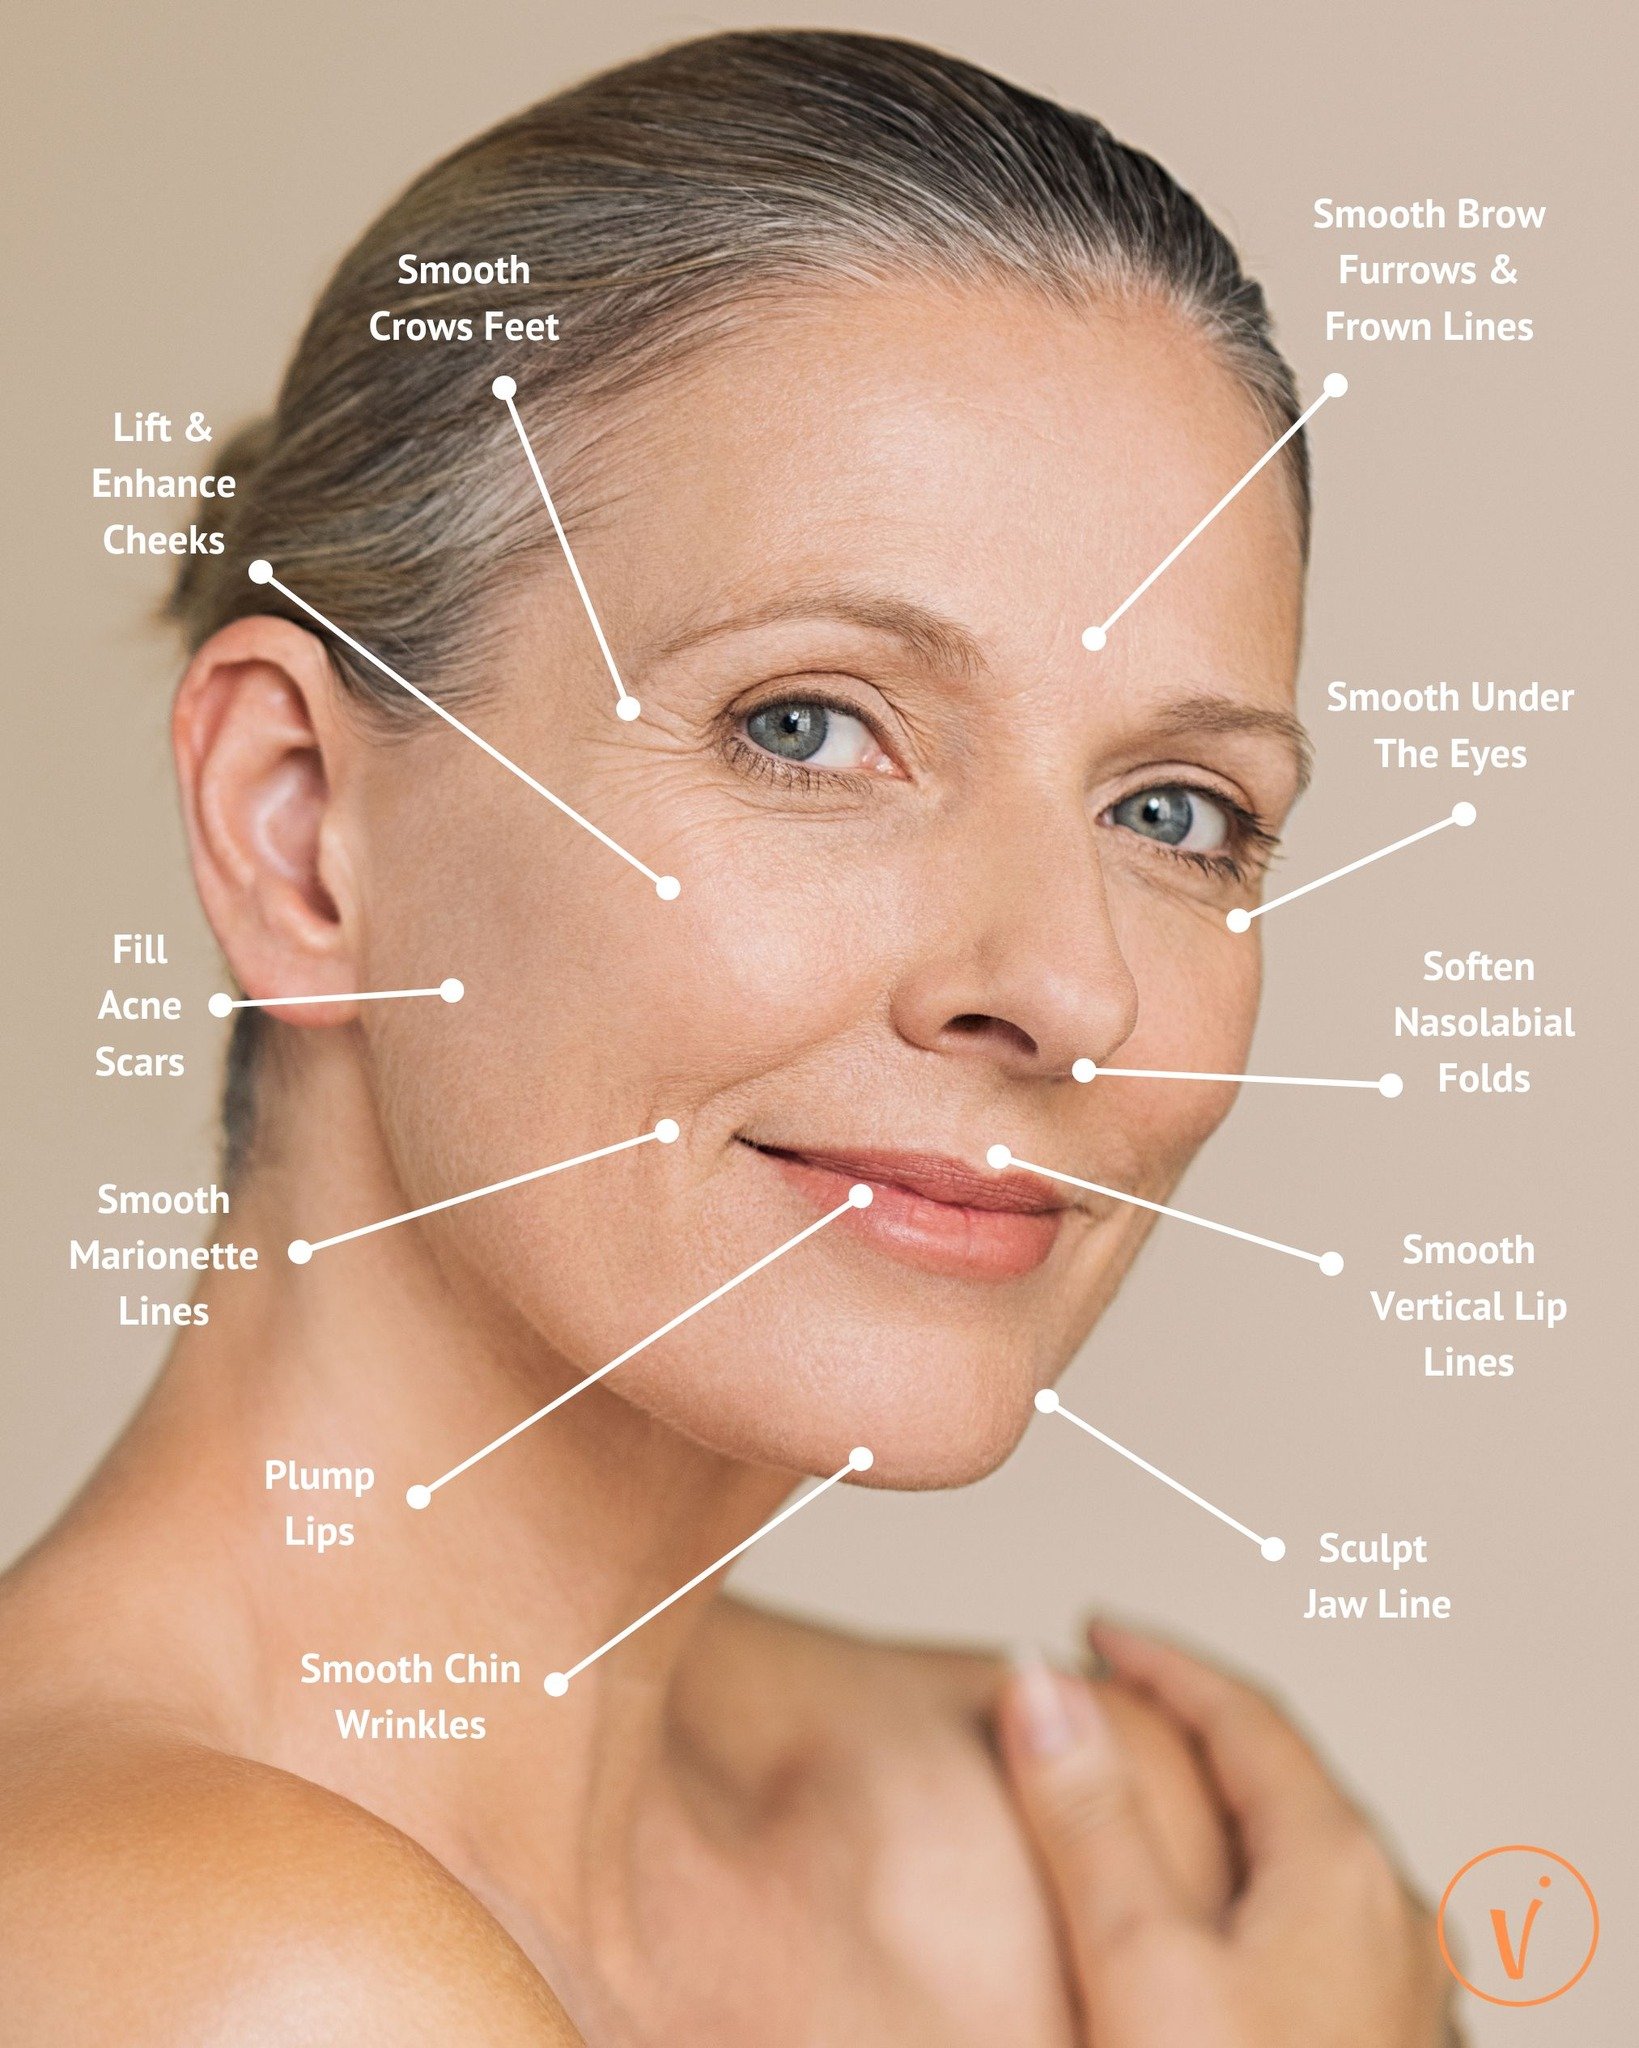 As we age, our facial structure changes. With time, our cheek bones flatten, and we lose our fat pads and the supportive collagen matrix in our skin. The result is hollow or sunken spaces, and deep lines and folds. Dermal fillers are a soft, gel like